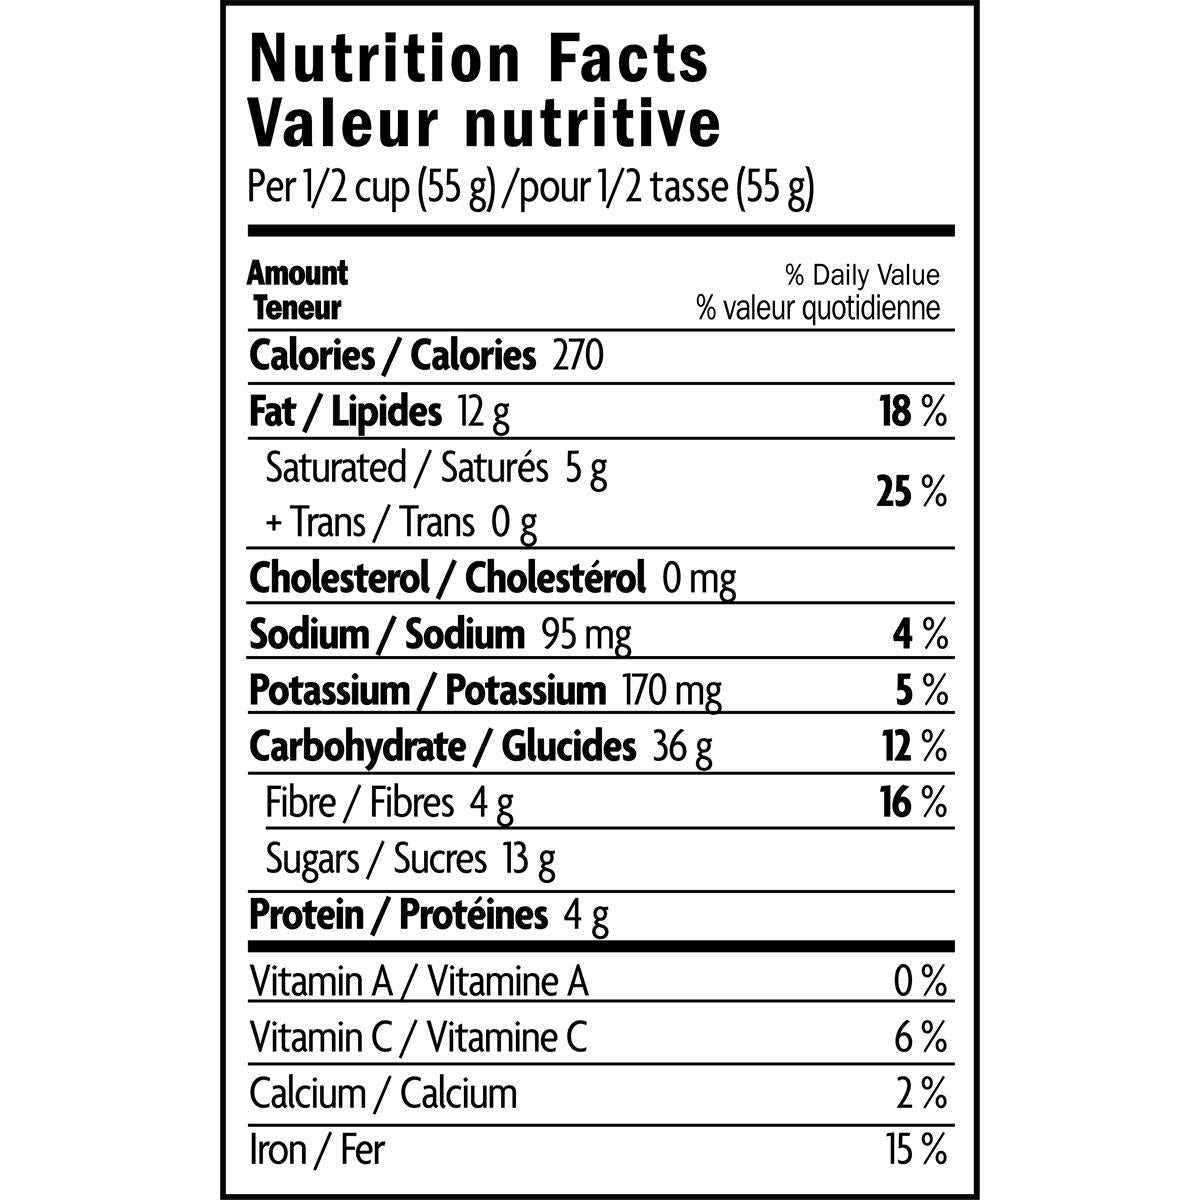 Natures Path Love Crunch (Chocolate Macaroon) Nutritional Panel